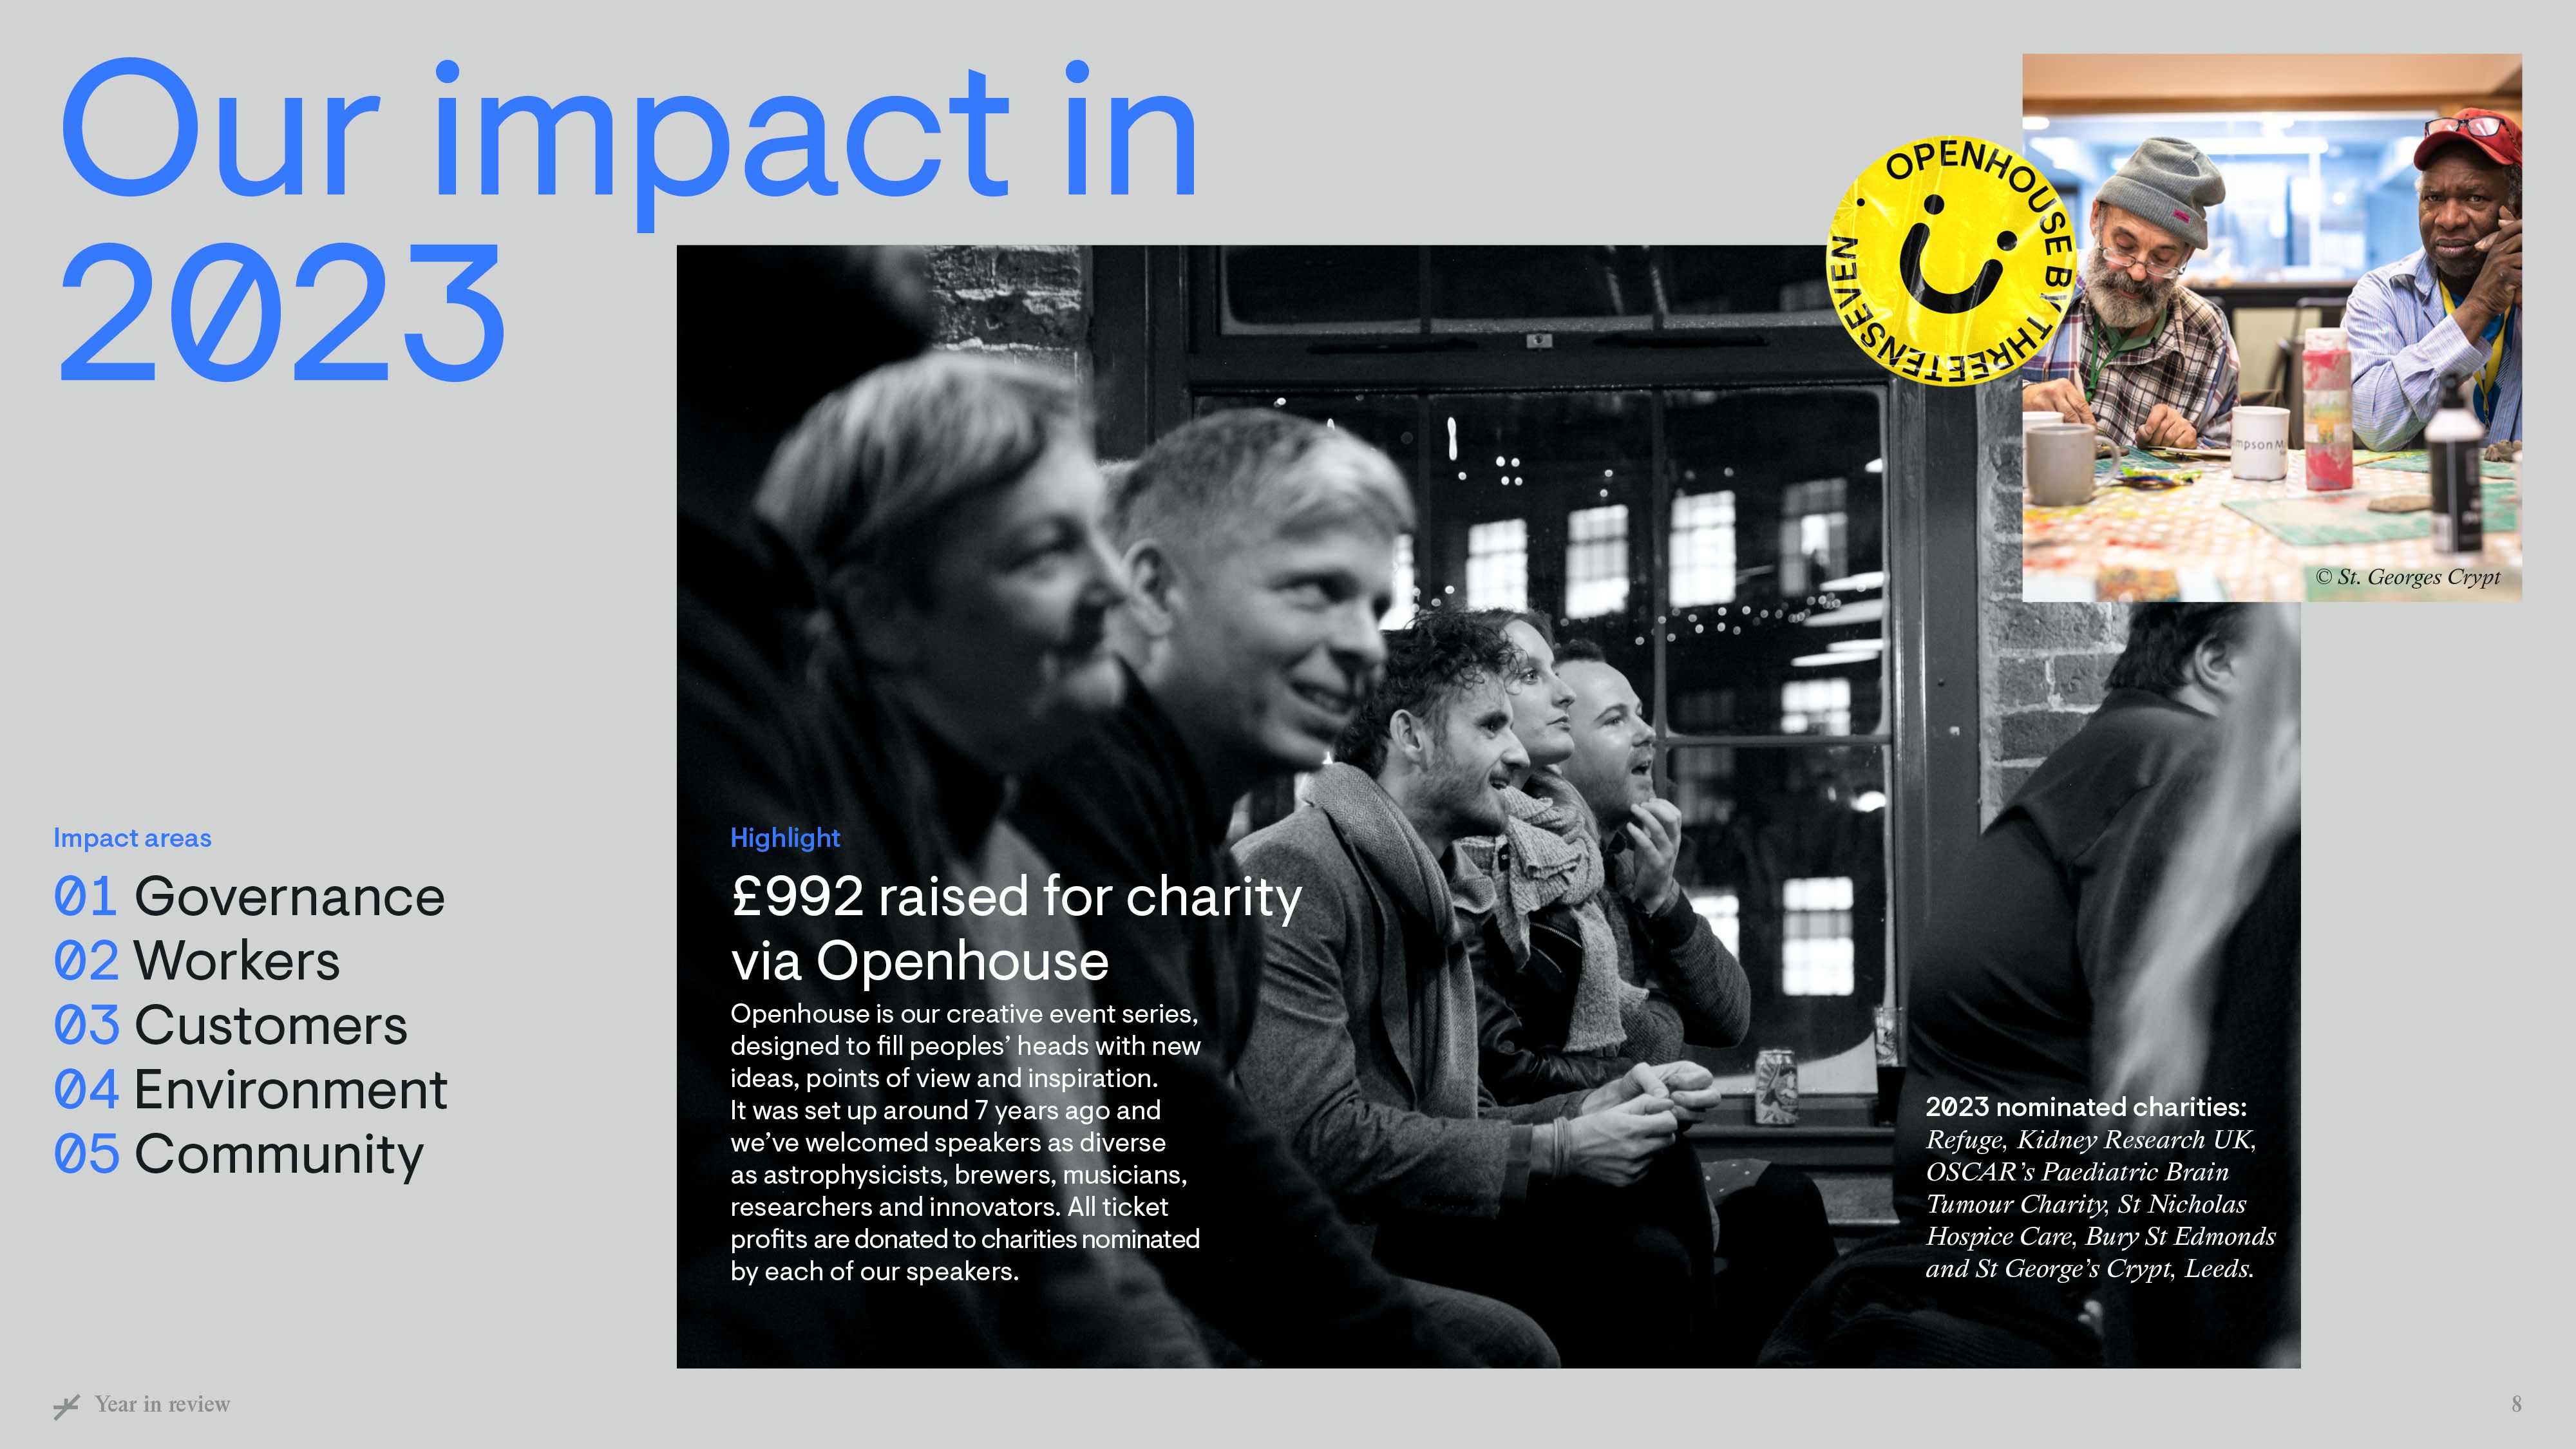 Screengrab from PDF report mentioning £992 raised for charity via Openhouse